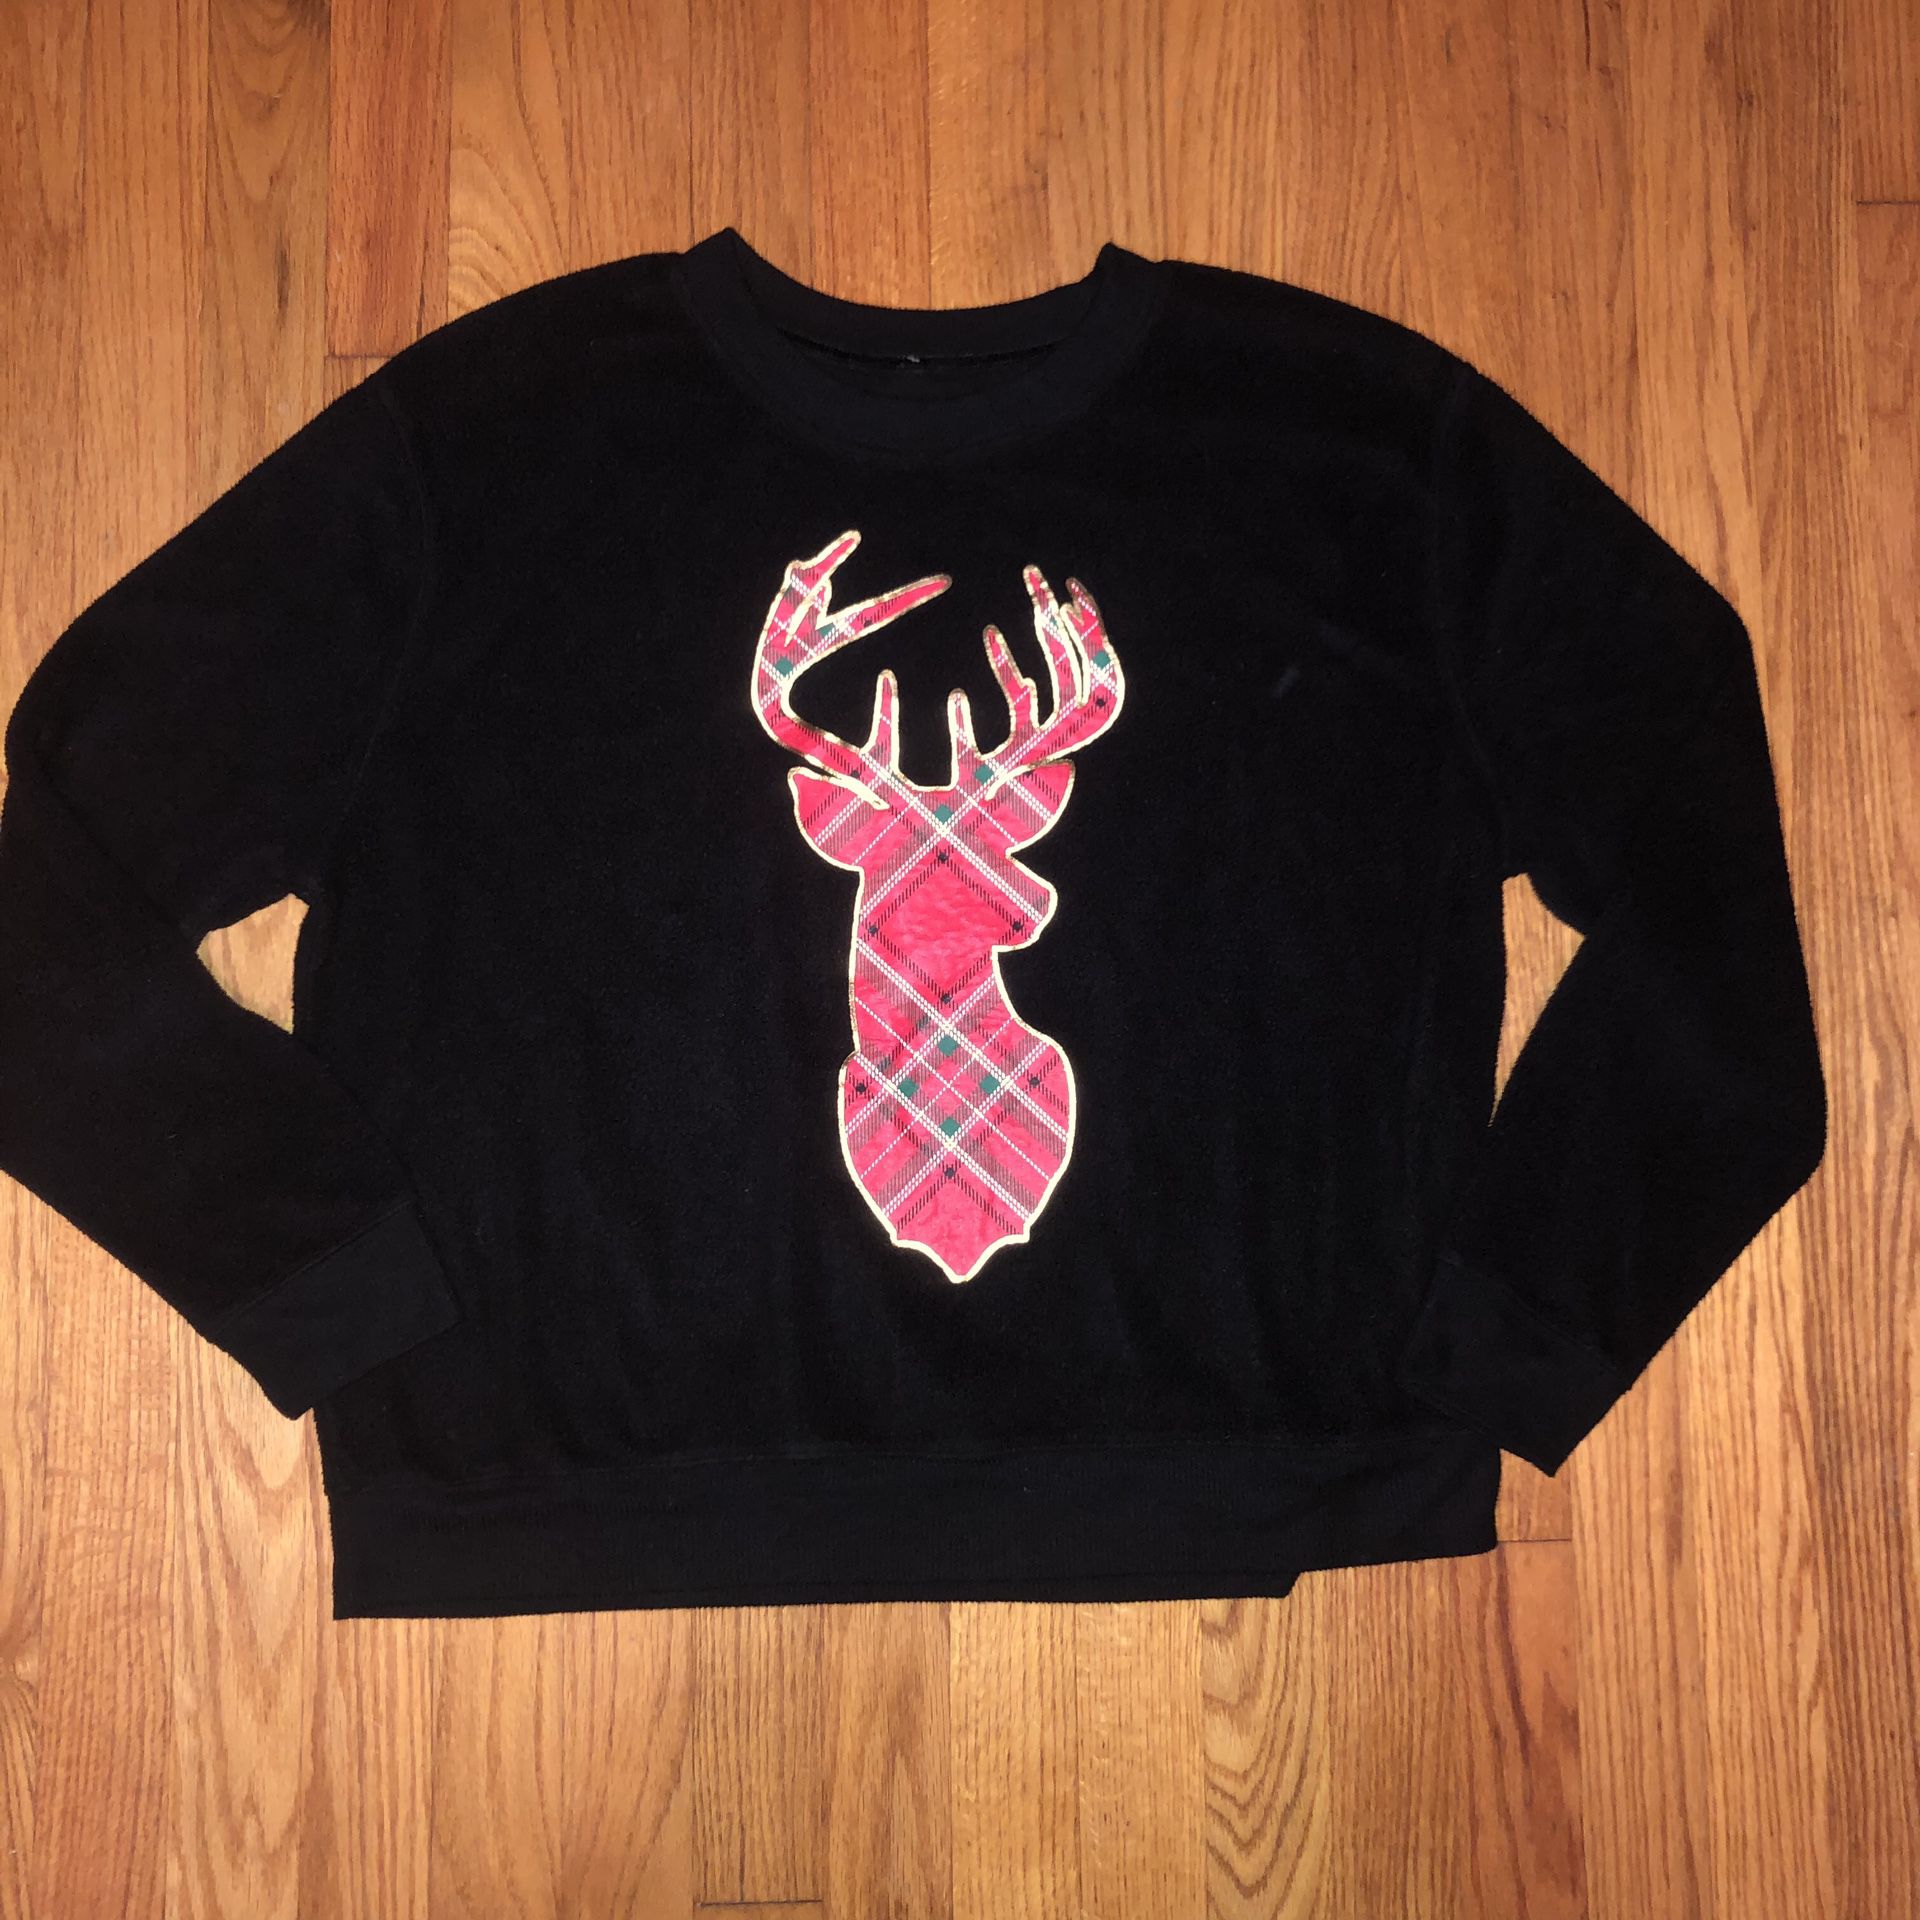 Justify size XL black sweatshirt with a plaid reindeer on the front